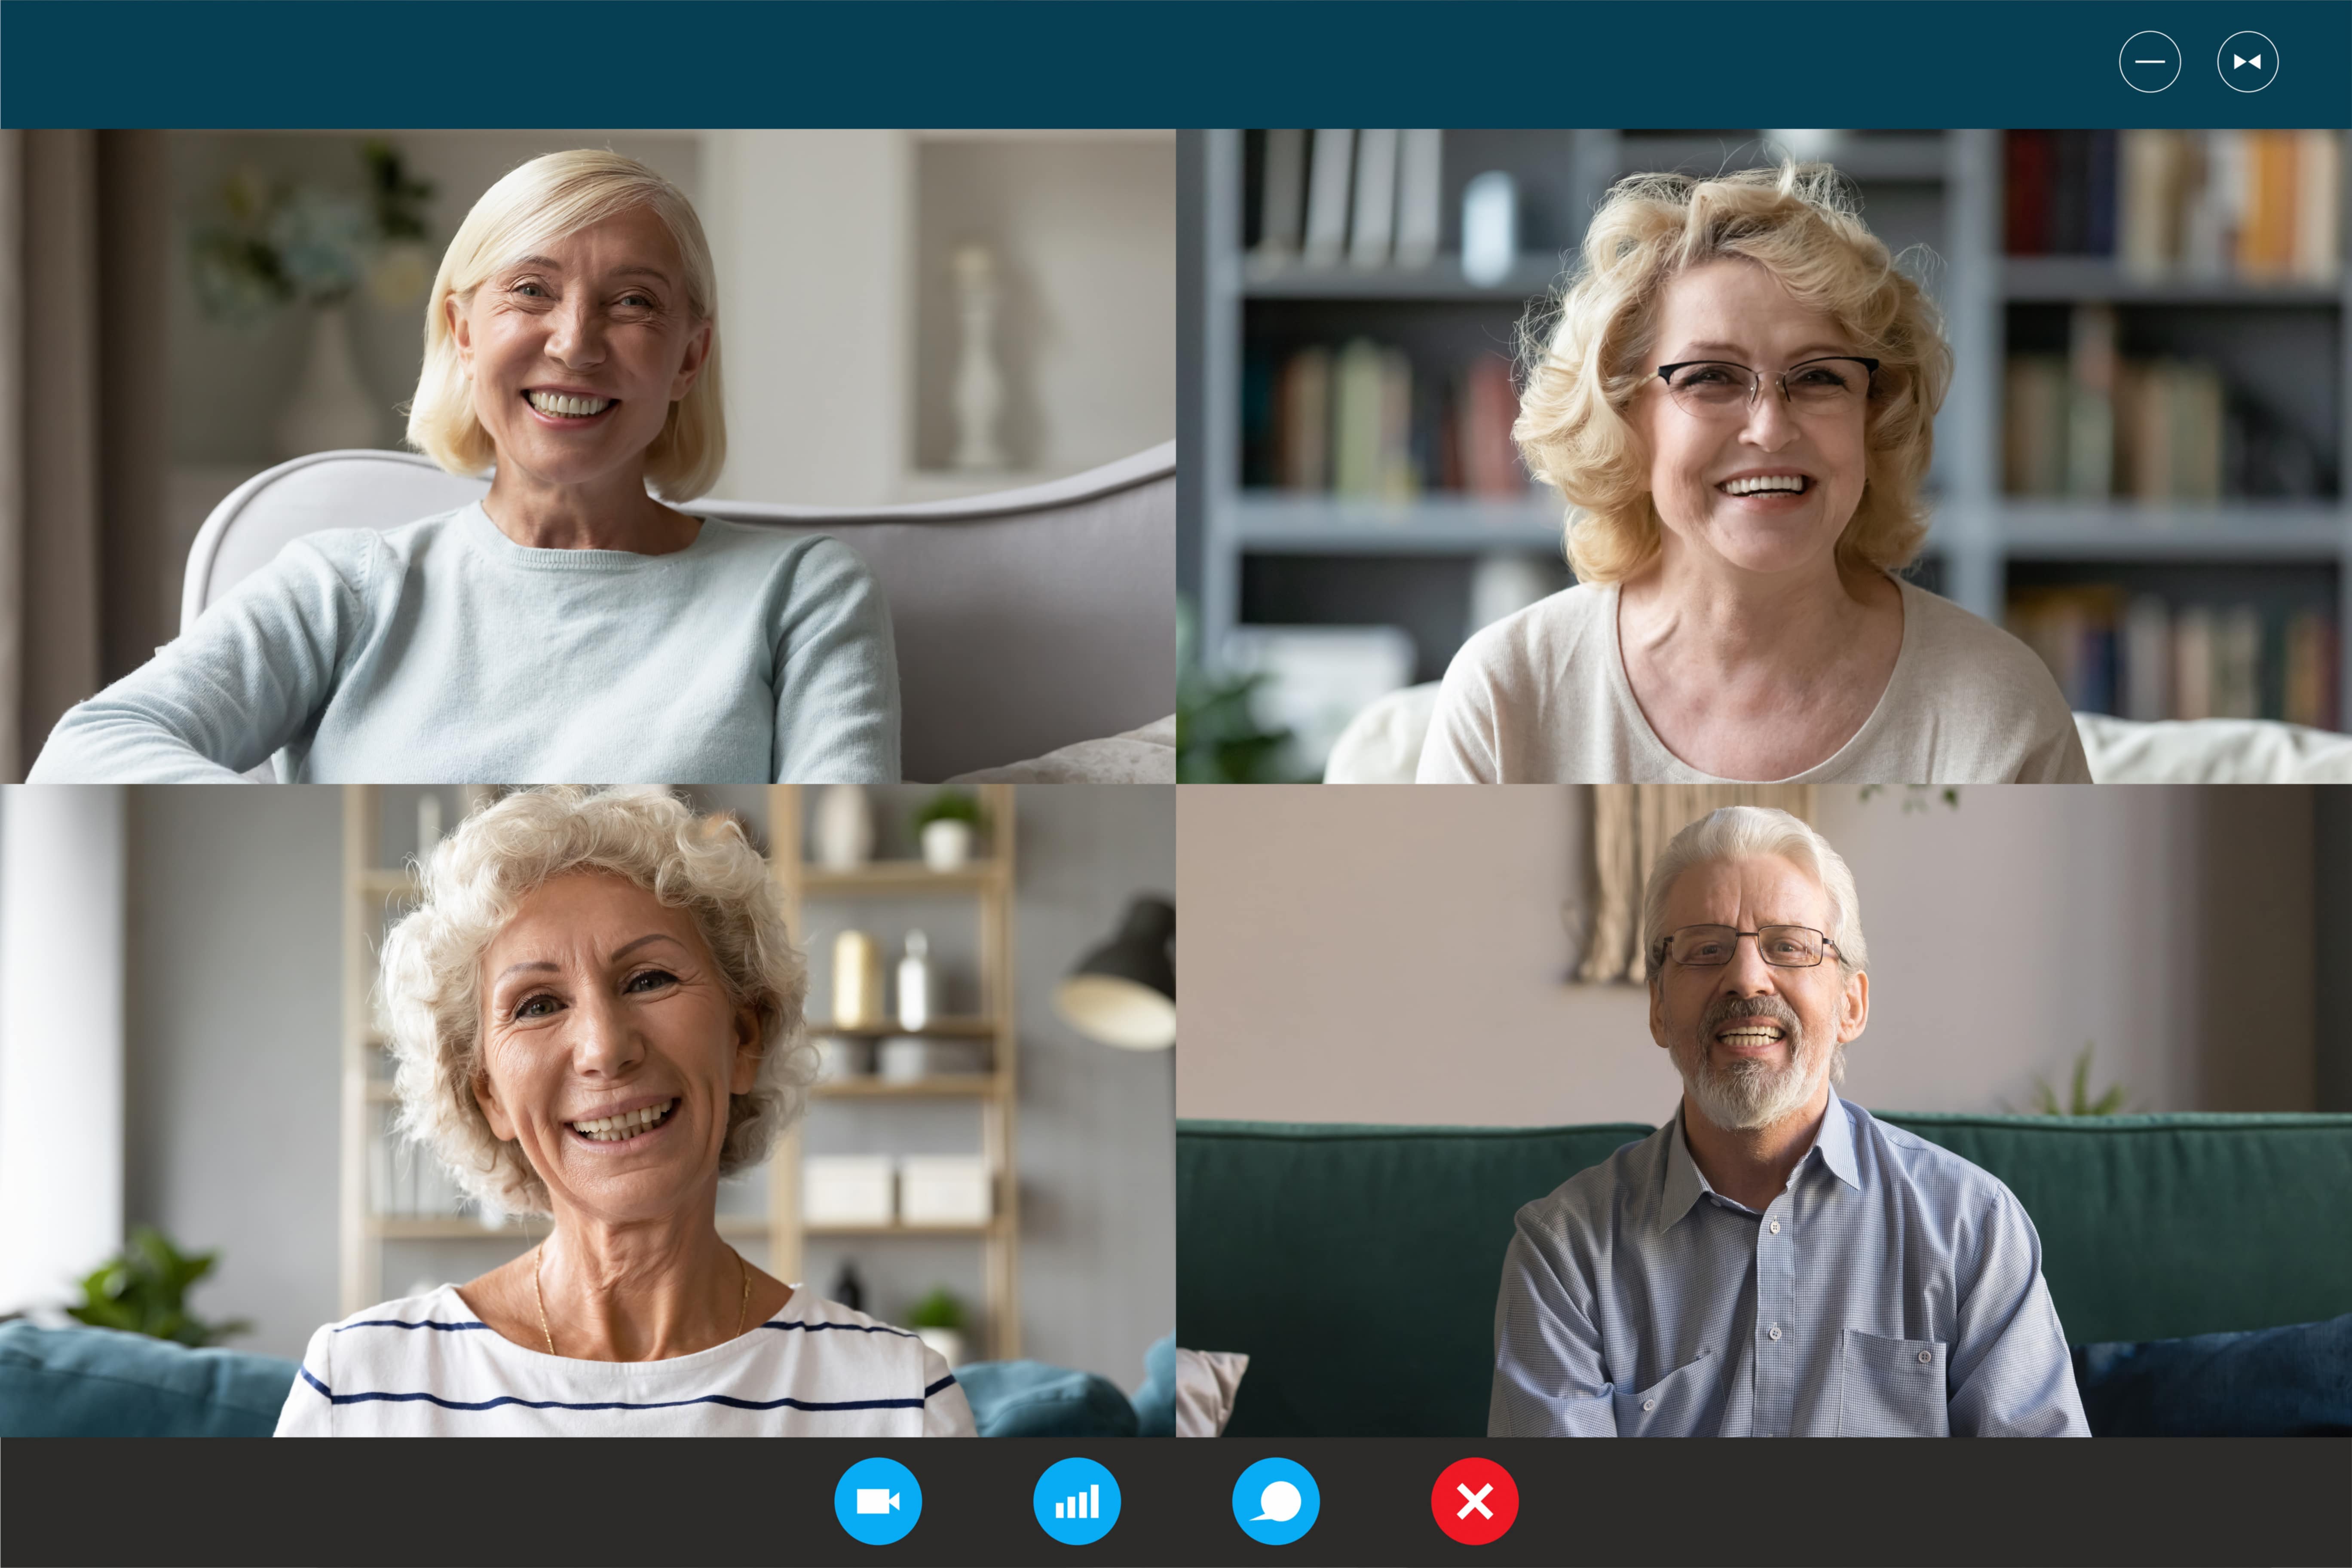 State Super members deliver clear message: Balance social responsibility and retirement incomes - Four Caucasian middle-aged 50s people involved at group video call conference, laptop webcam head shot portraits view. Older generation and modern application technology easy convenient usage concept